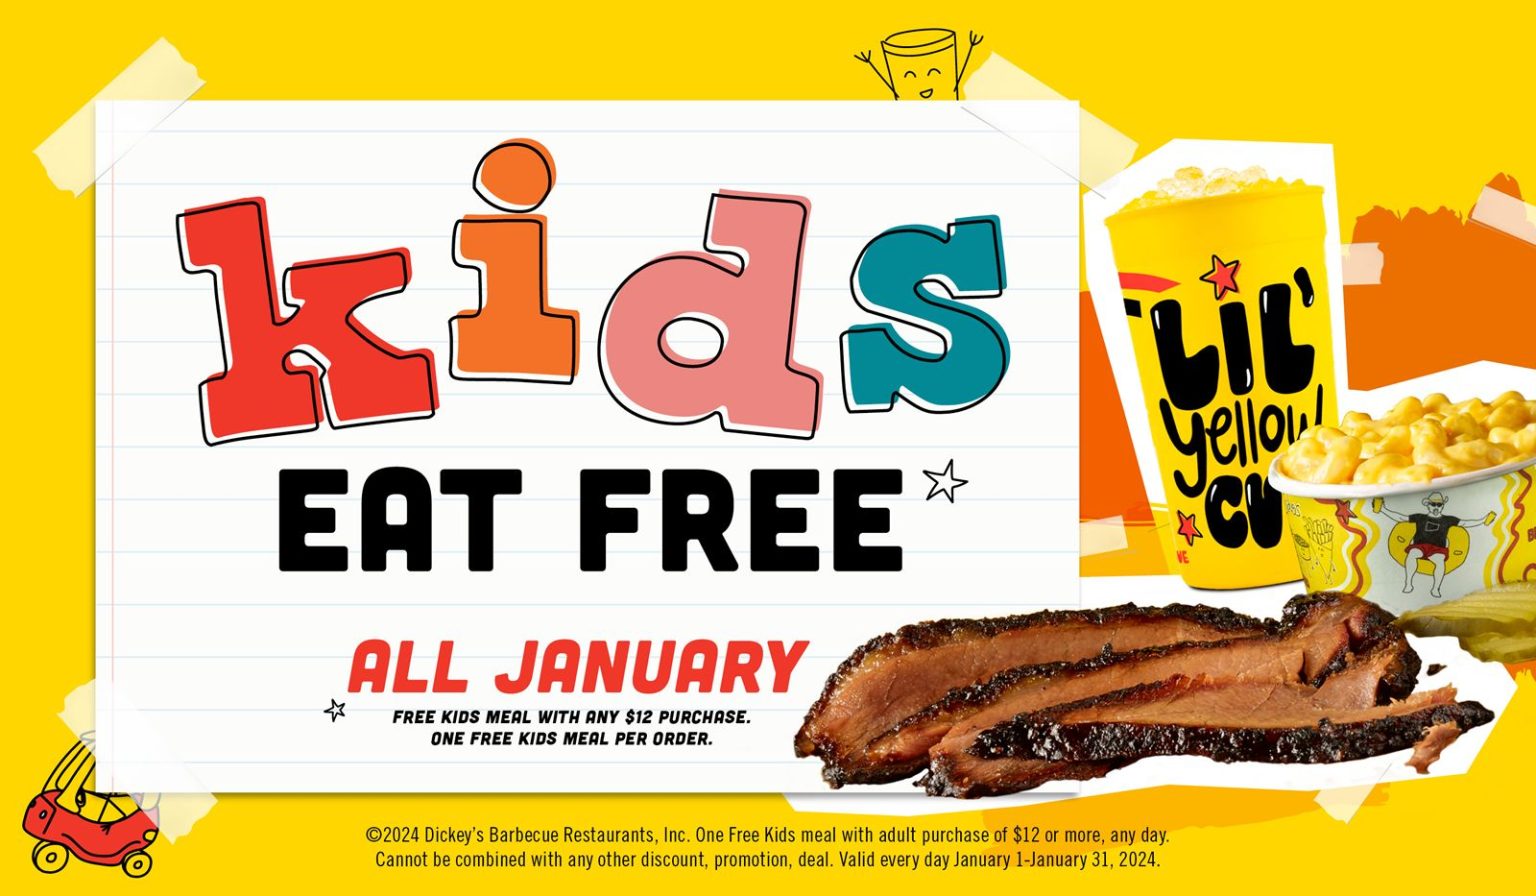 https://ecoxplorer.com/wp-content/uploads/2023/12/Dickeys-Barbecue-Pit-Kids-Eat-Free-for-January-2024-1536x896-1.jpg